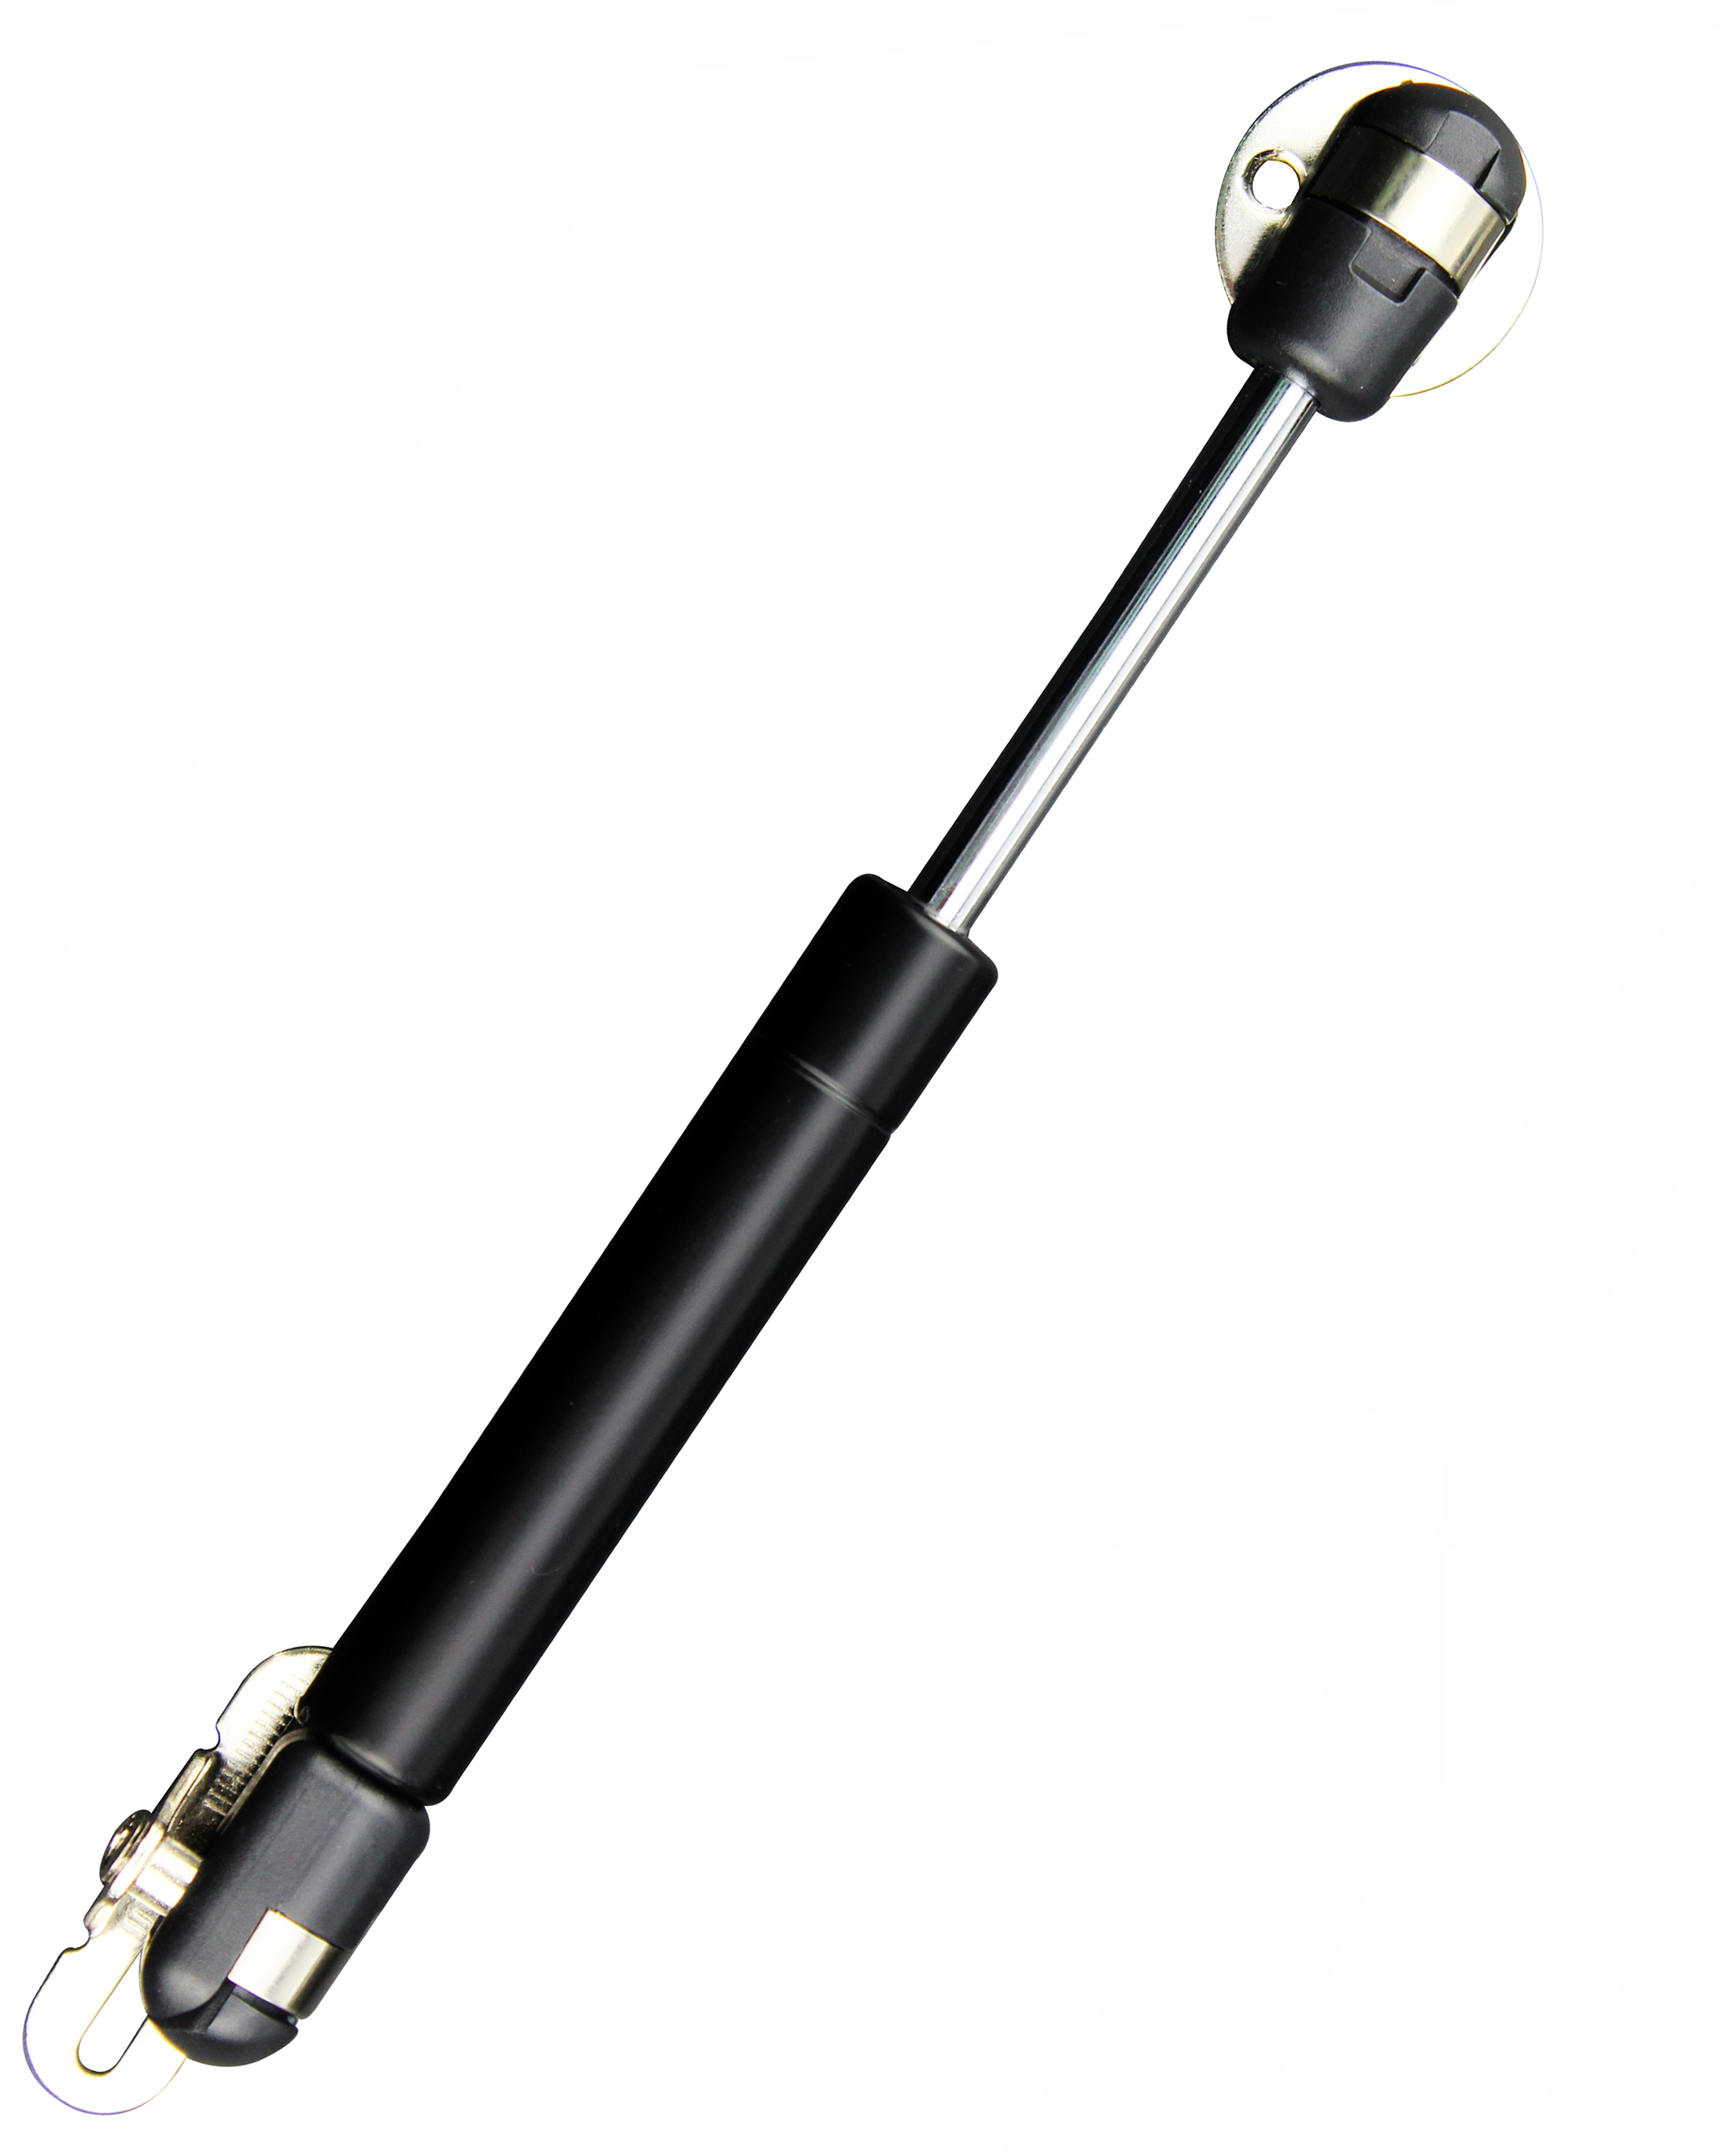 https://apexstone.co/wp-content/uploads/2020/08/80-N-7-inch-gas-struts.png